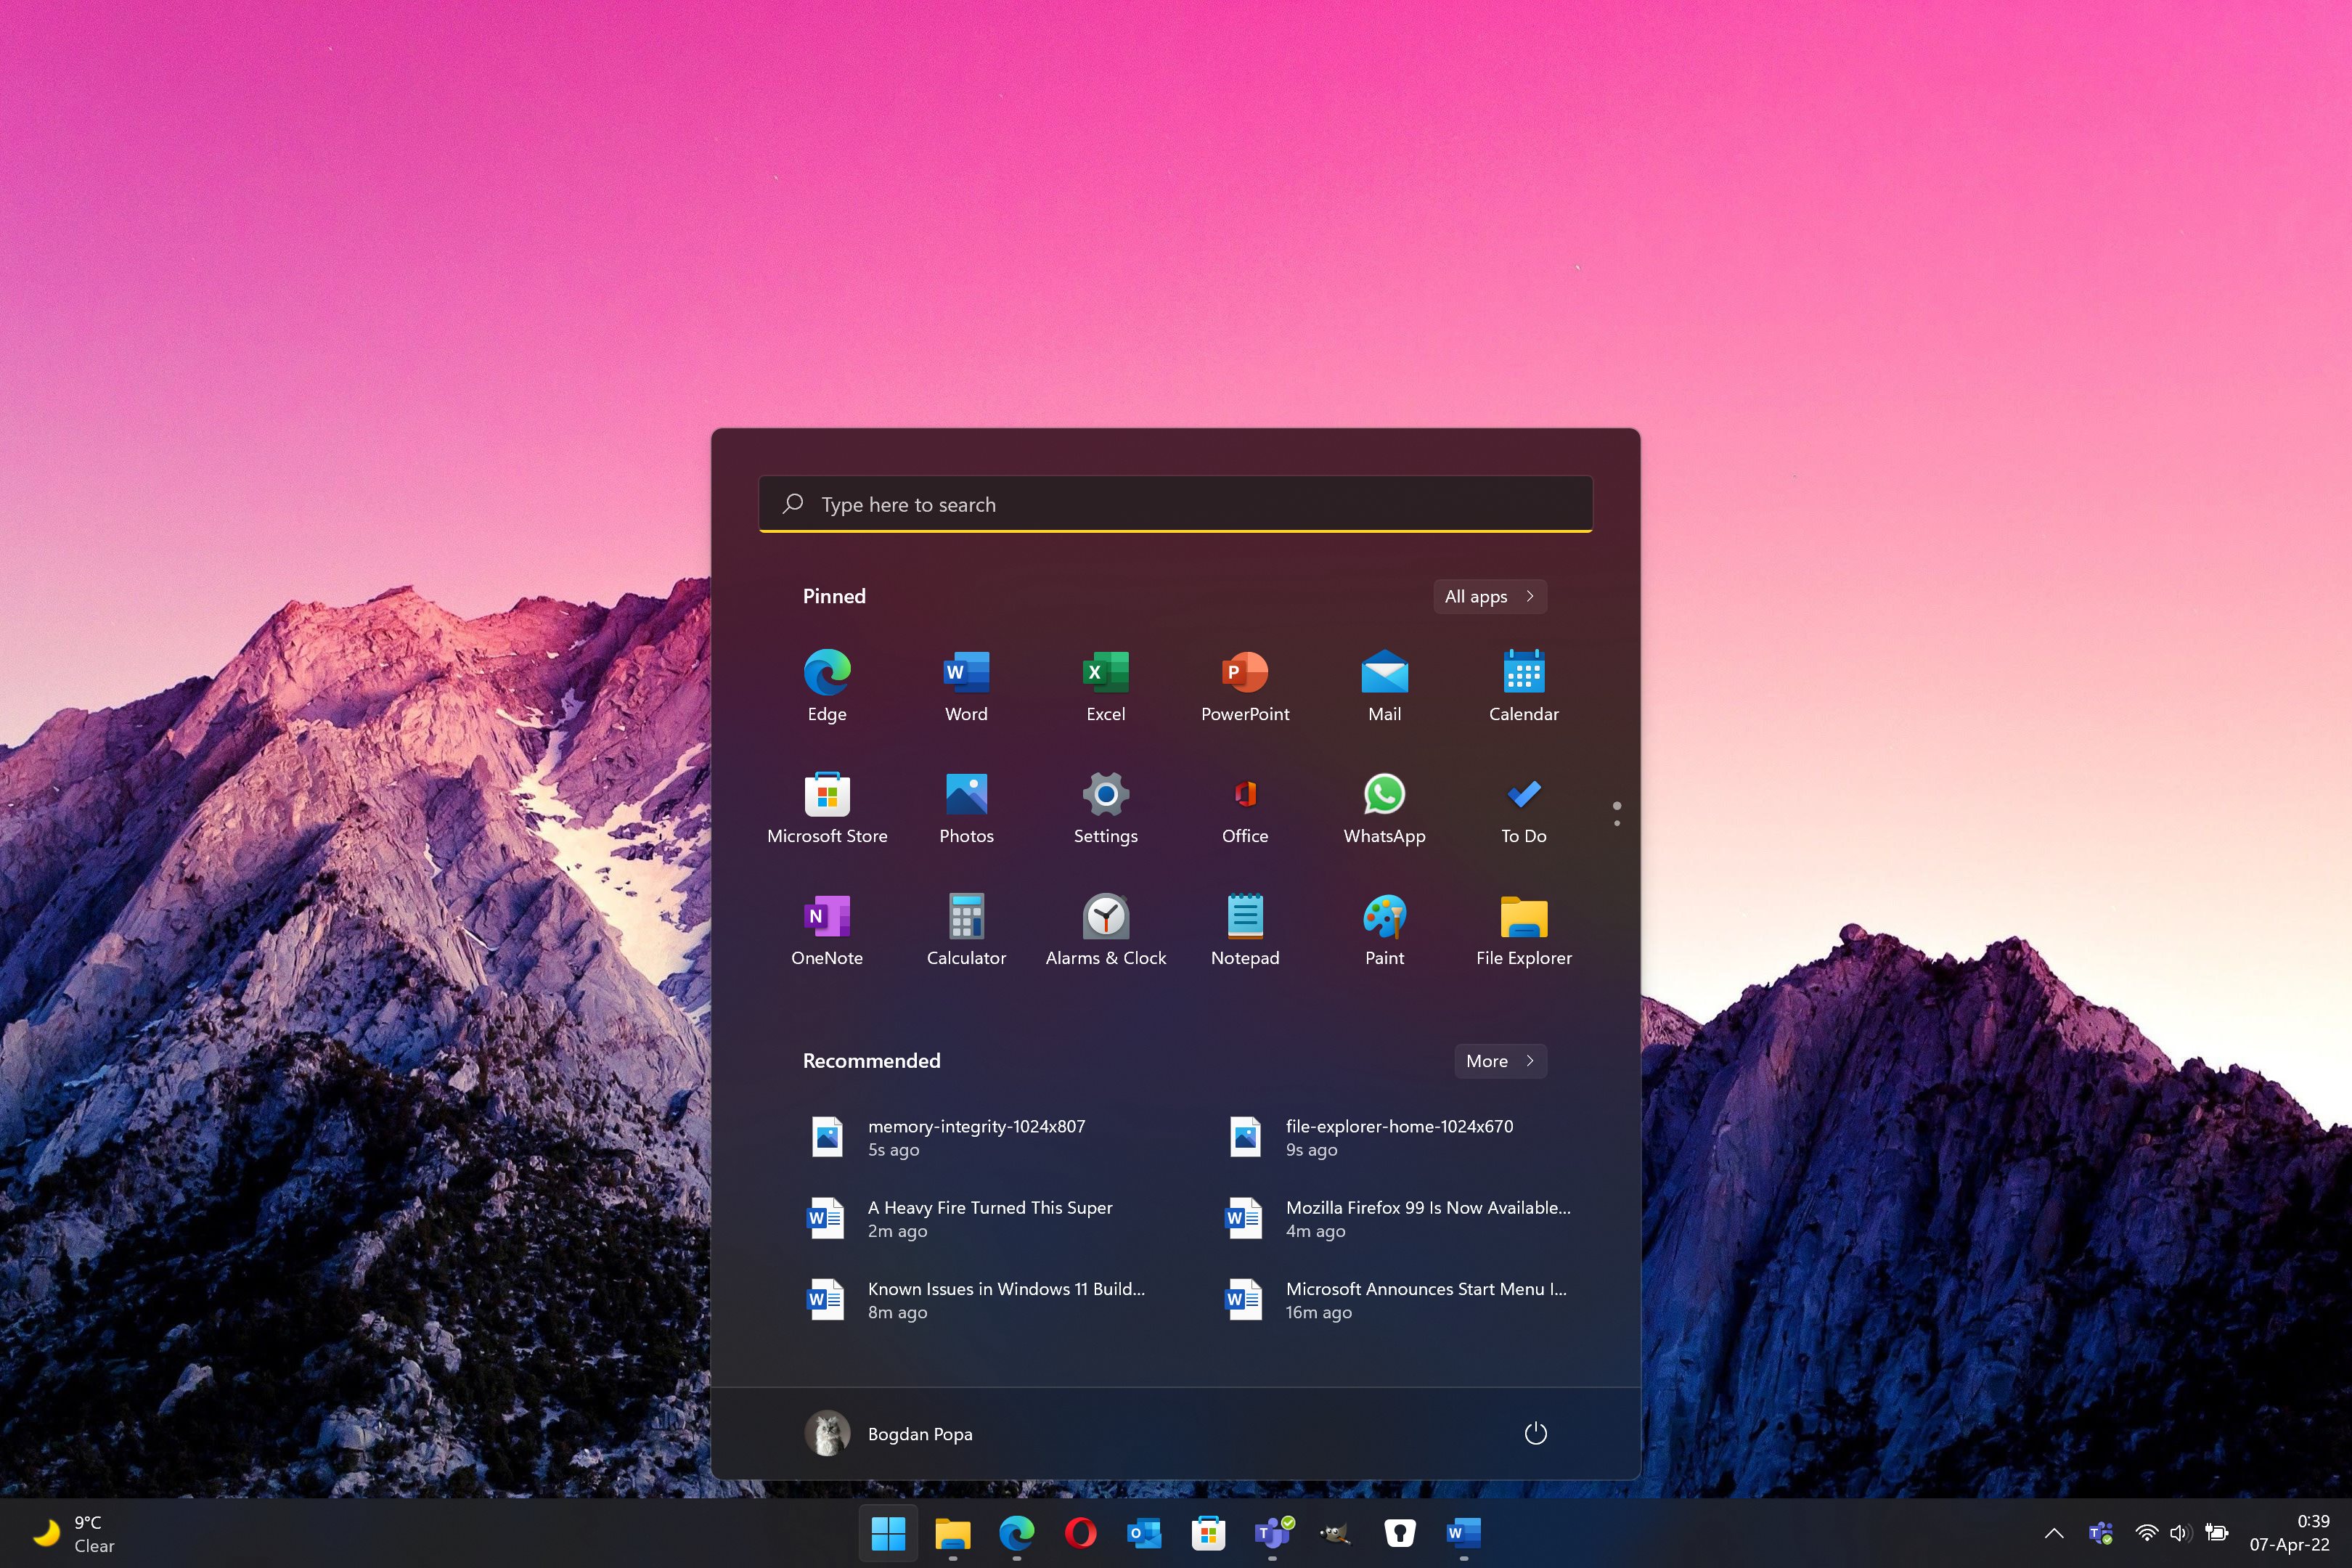 Microsoft announces Windows 11, with a new design, Start menu, and more -  The Verge